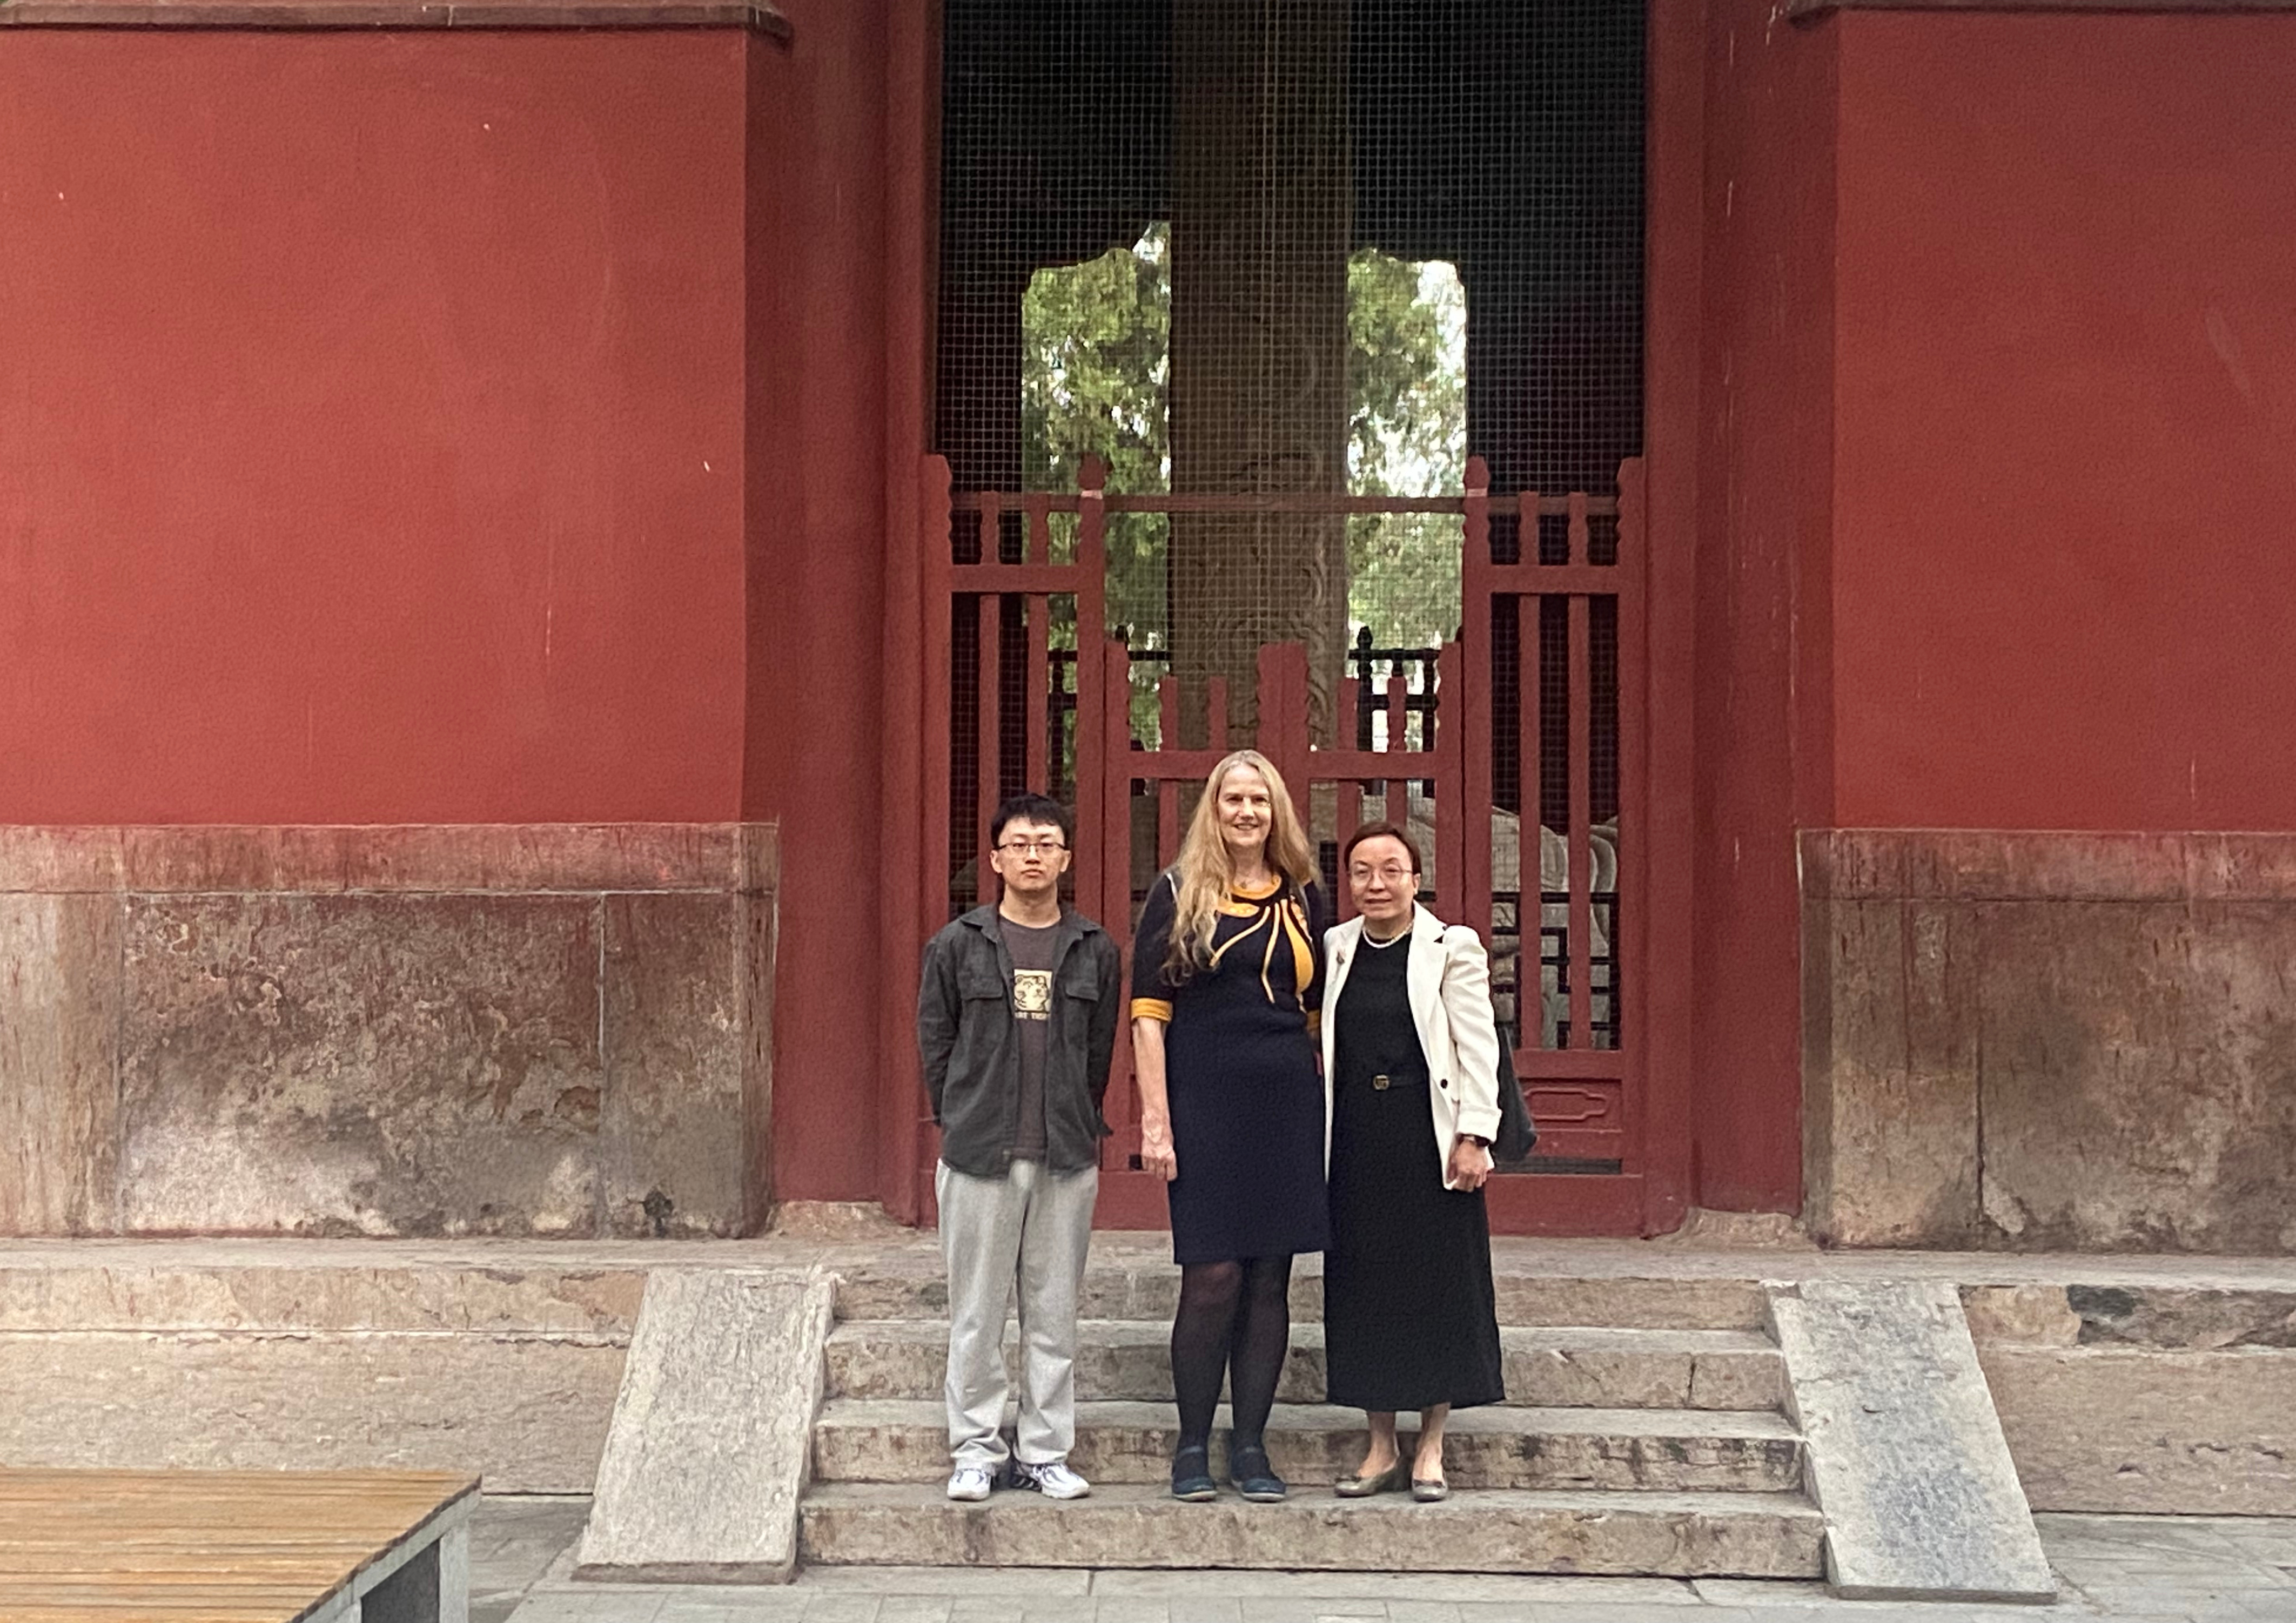 Jenny is pictured alongside a man and woman outside in front of a building in China